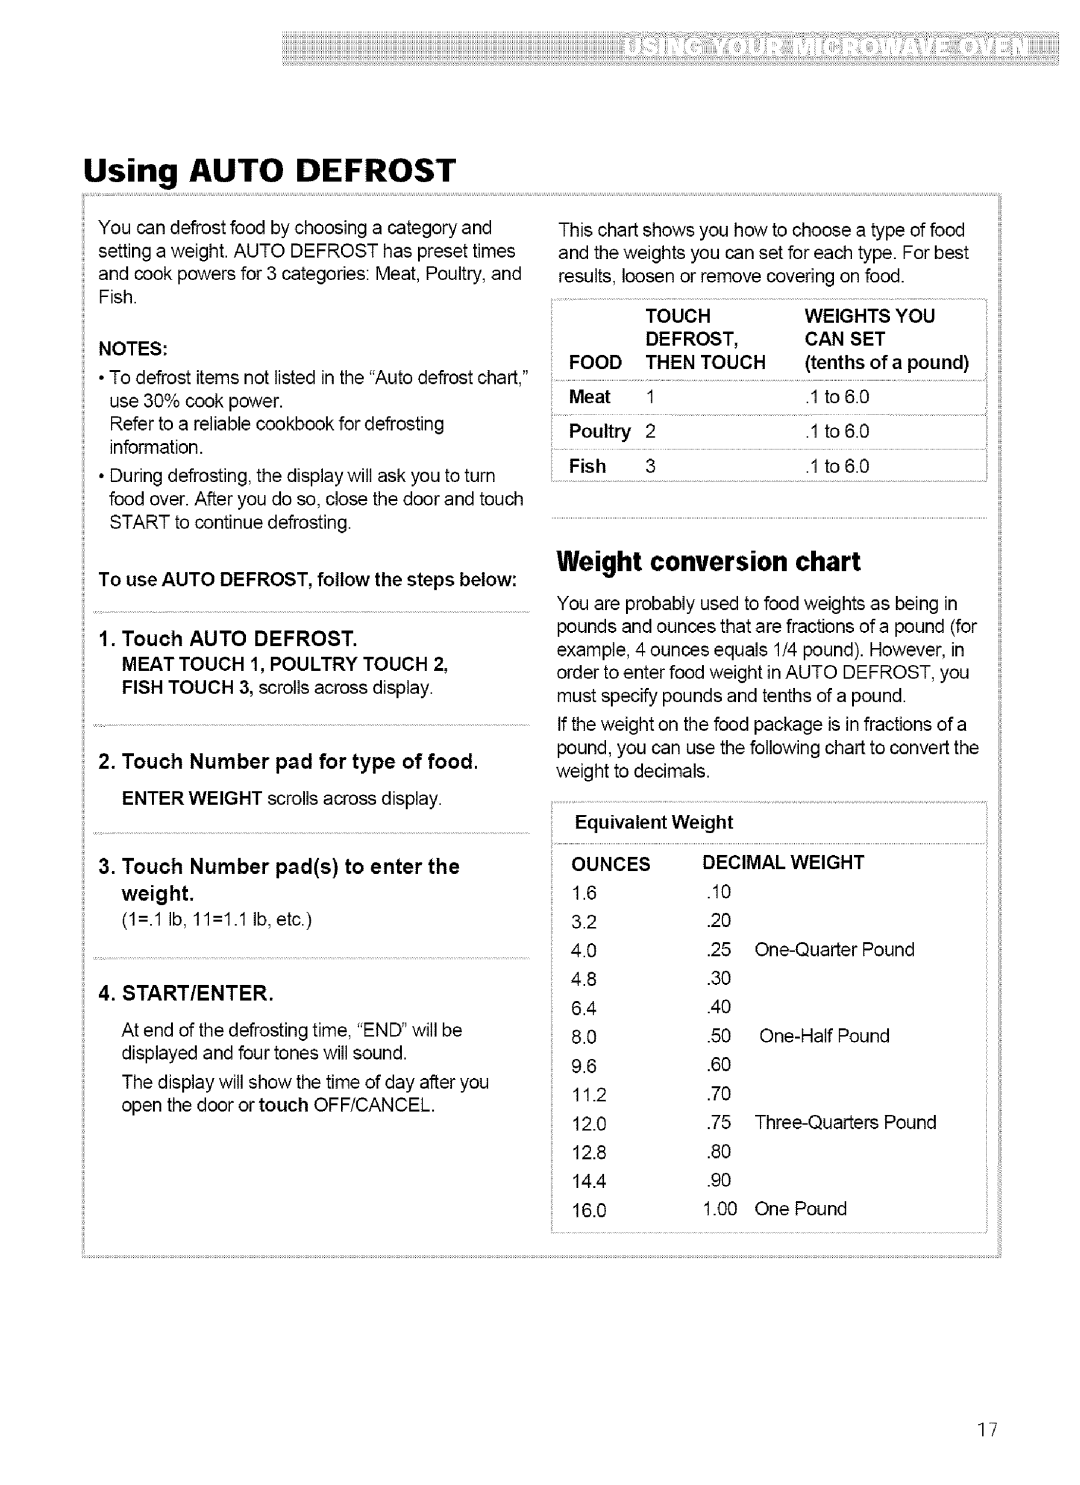 Kenmore 721.62759, 721.62752 manual Using AUTO DEFROST, Weight conversion chart 